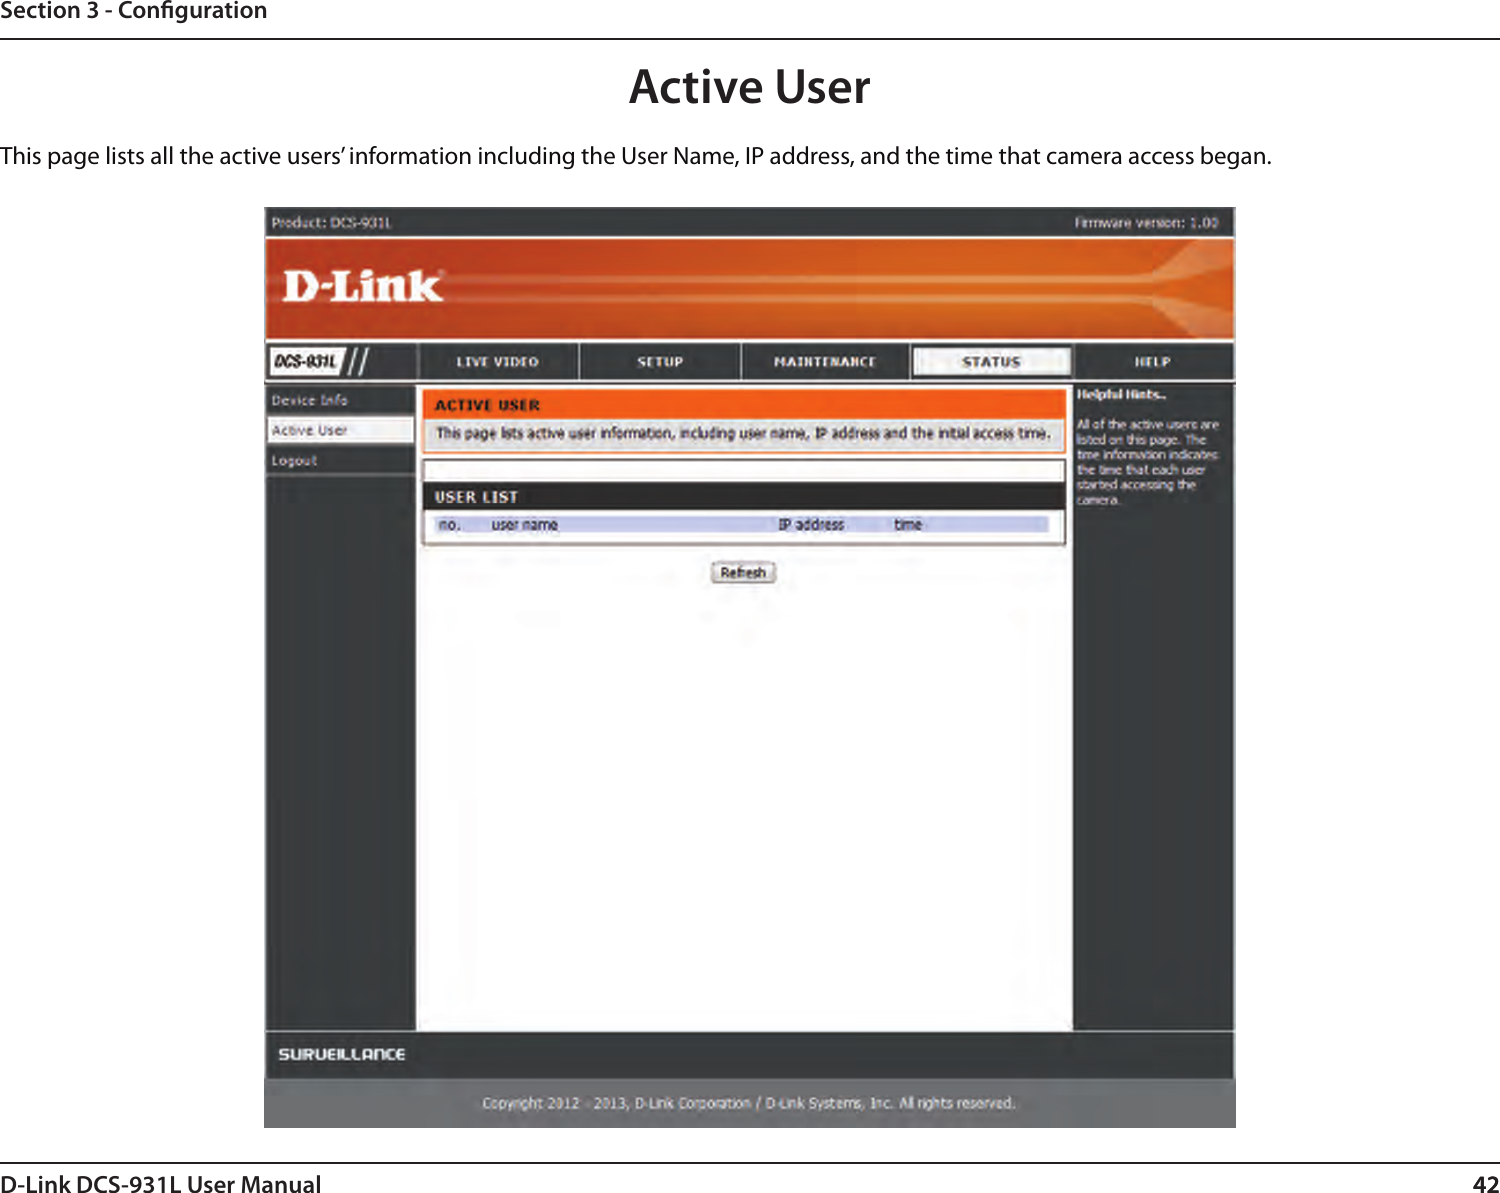 42D-Link DCS-931L User Manual 42Section 3 - CongurationActive UserThis page lists all the active users’ information including the User Name, IP address, and the time that camera access began.